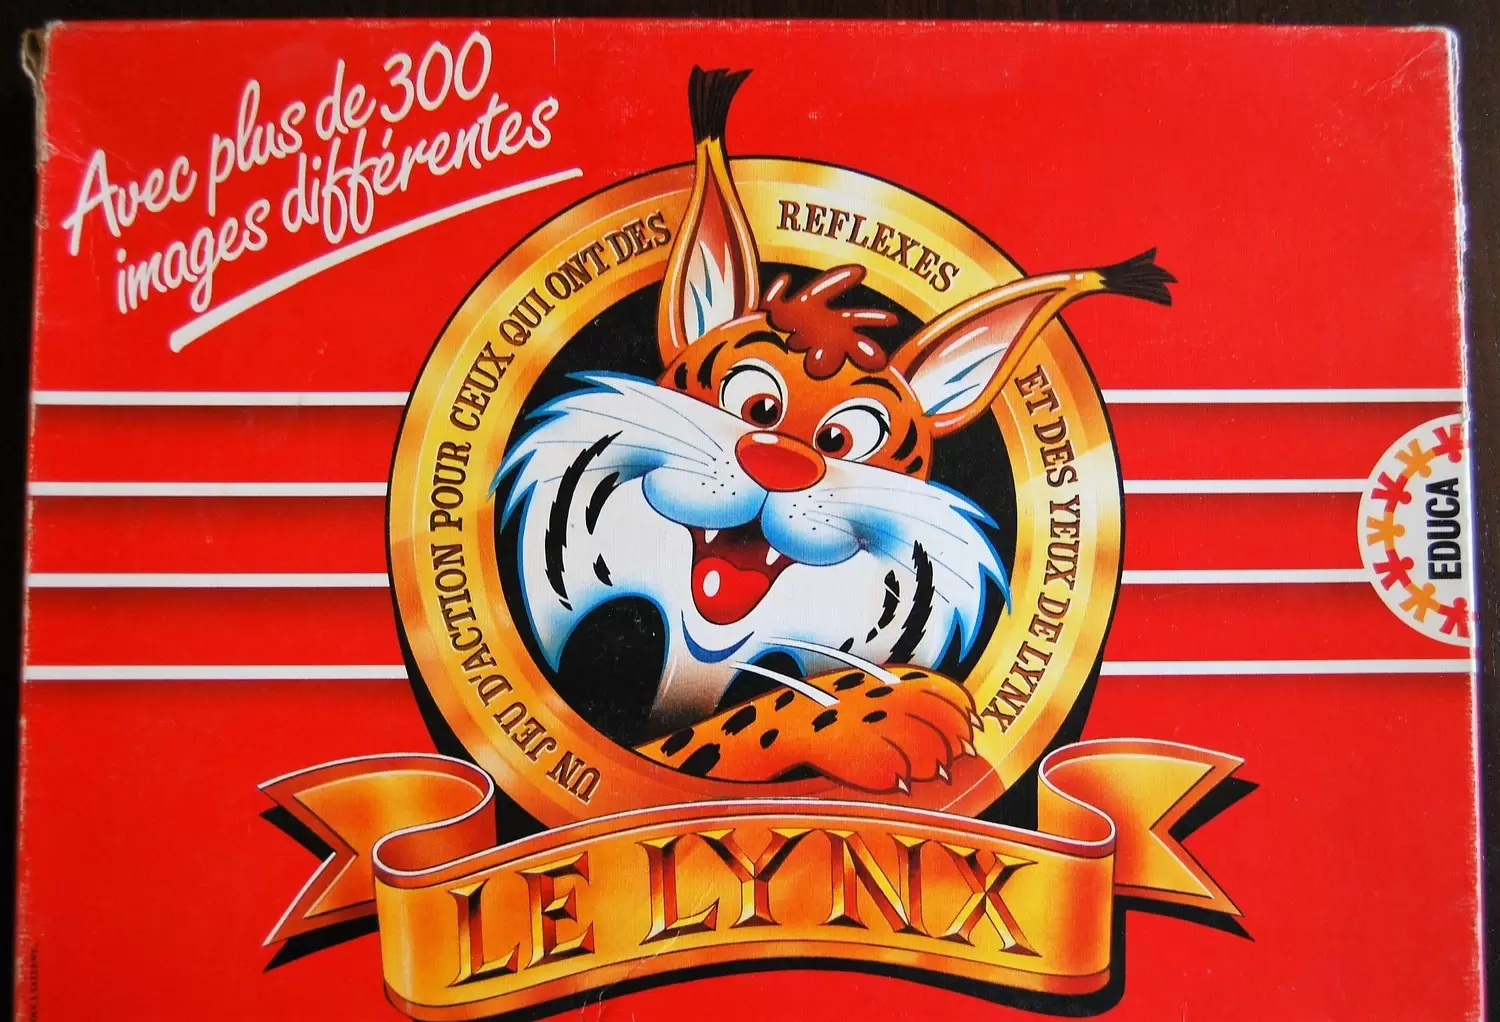 Others Boardgames - Le lynx